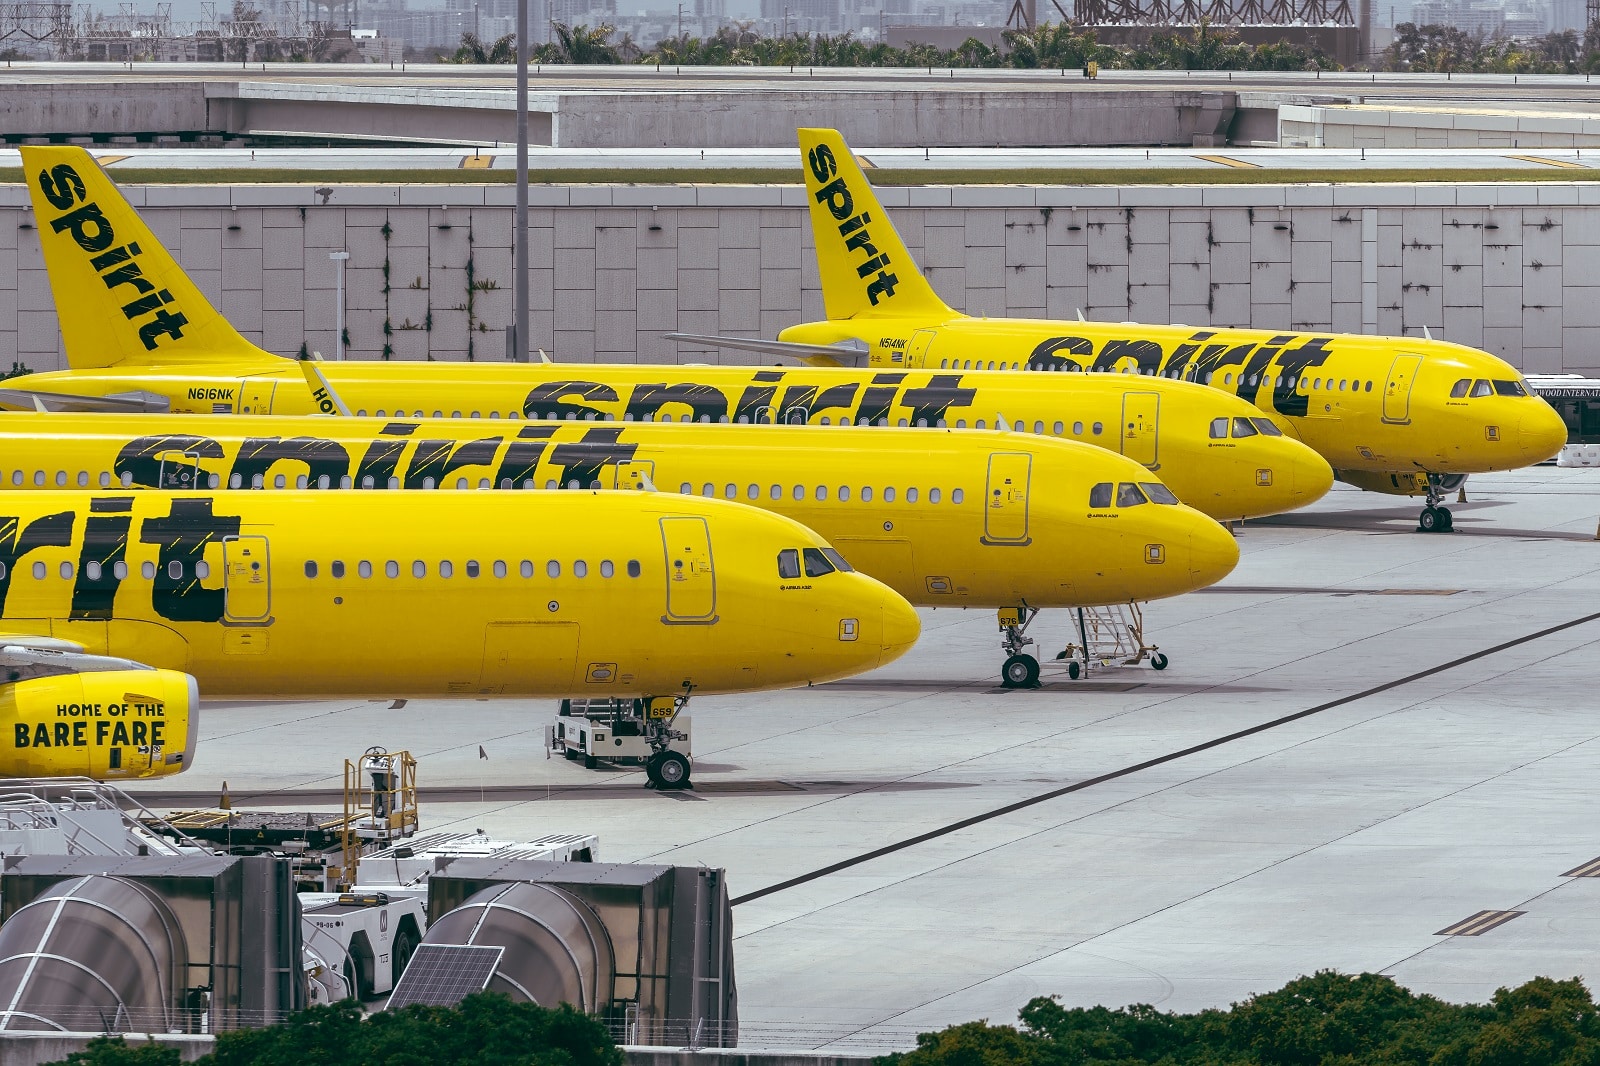 <p><span>Spirit Airlines, known for its ultra-low-cost model, faces an uncertain future following the ruling. The carrier has struggled with profitability issues amidst rising operational costs and supply chain challenges. The blocked merger raises questions about its sustainability and potential next steps.</span></p>